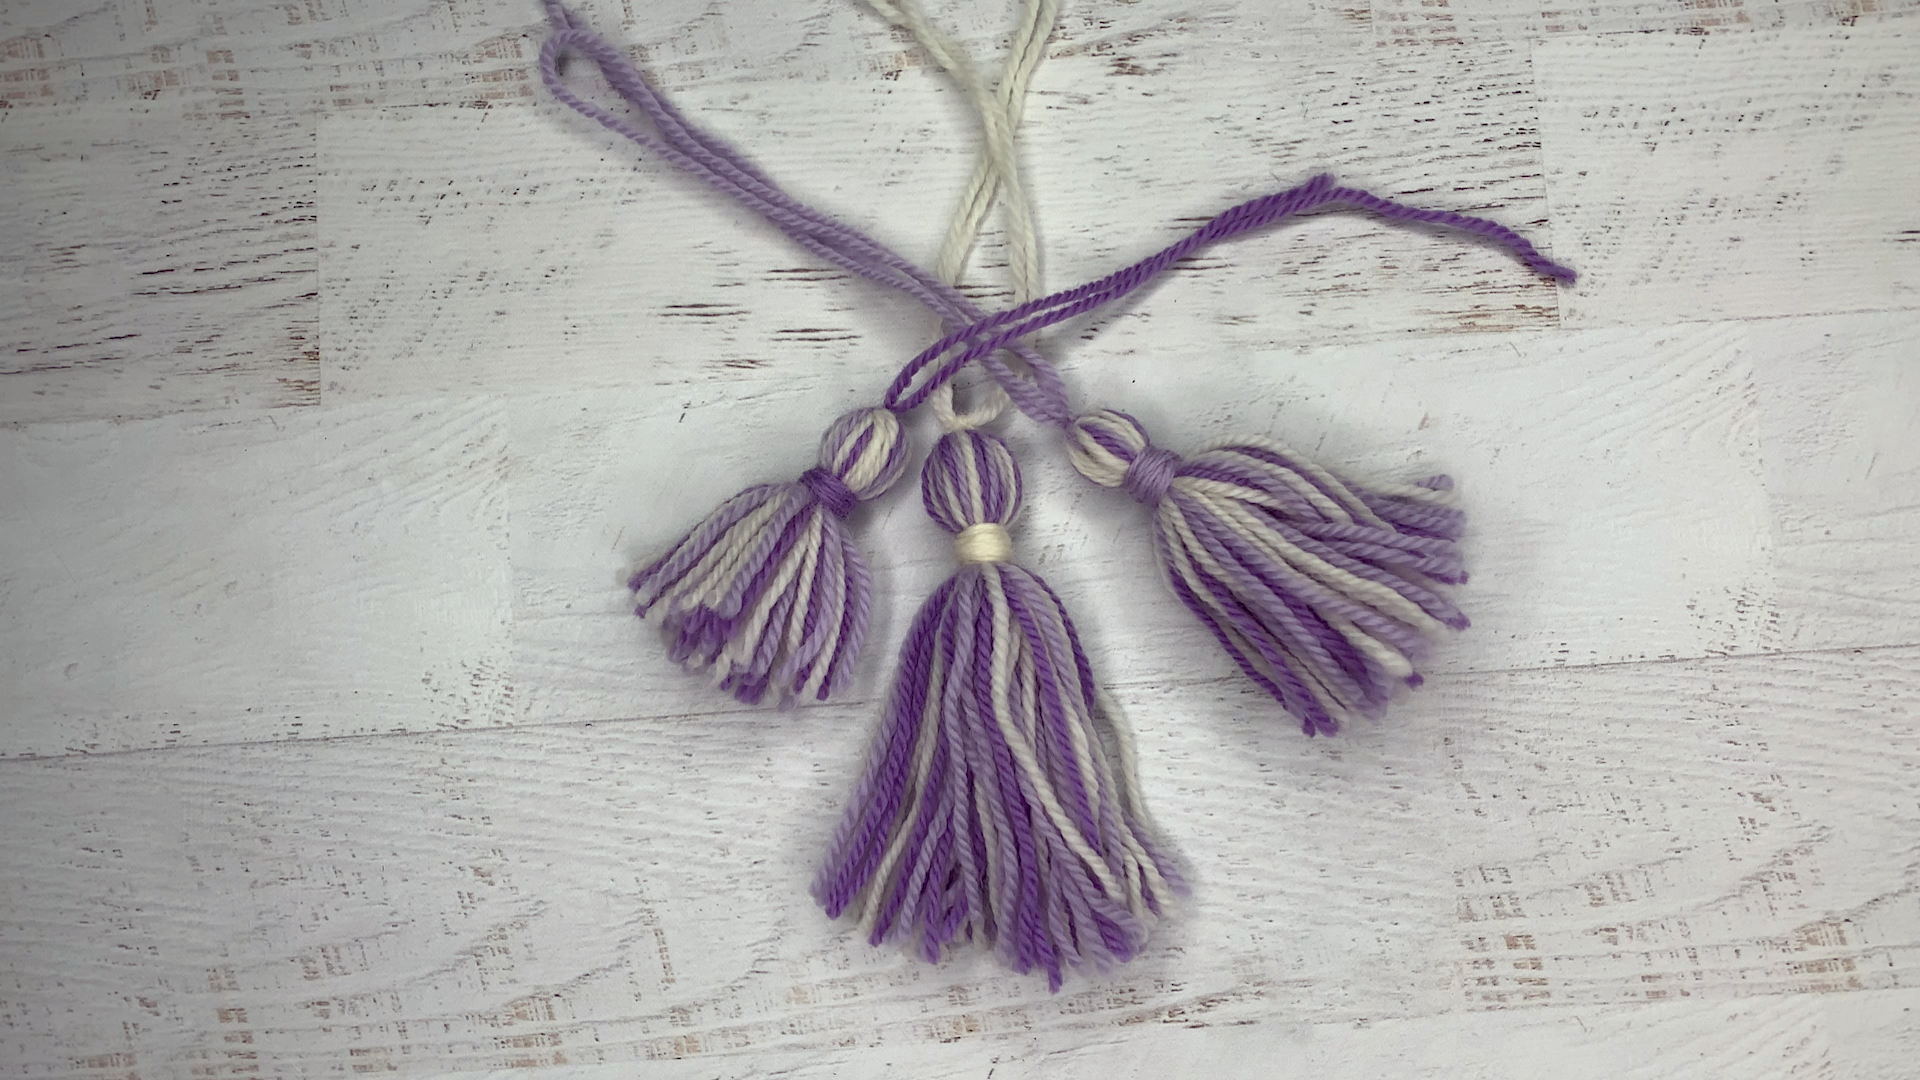 How to Make Tassels for Your Knitting Projects